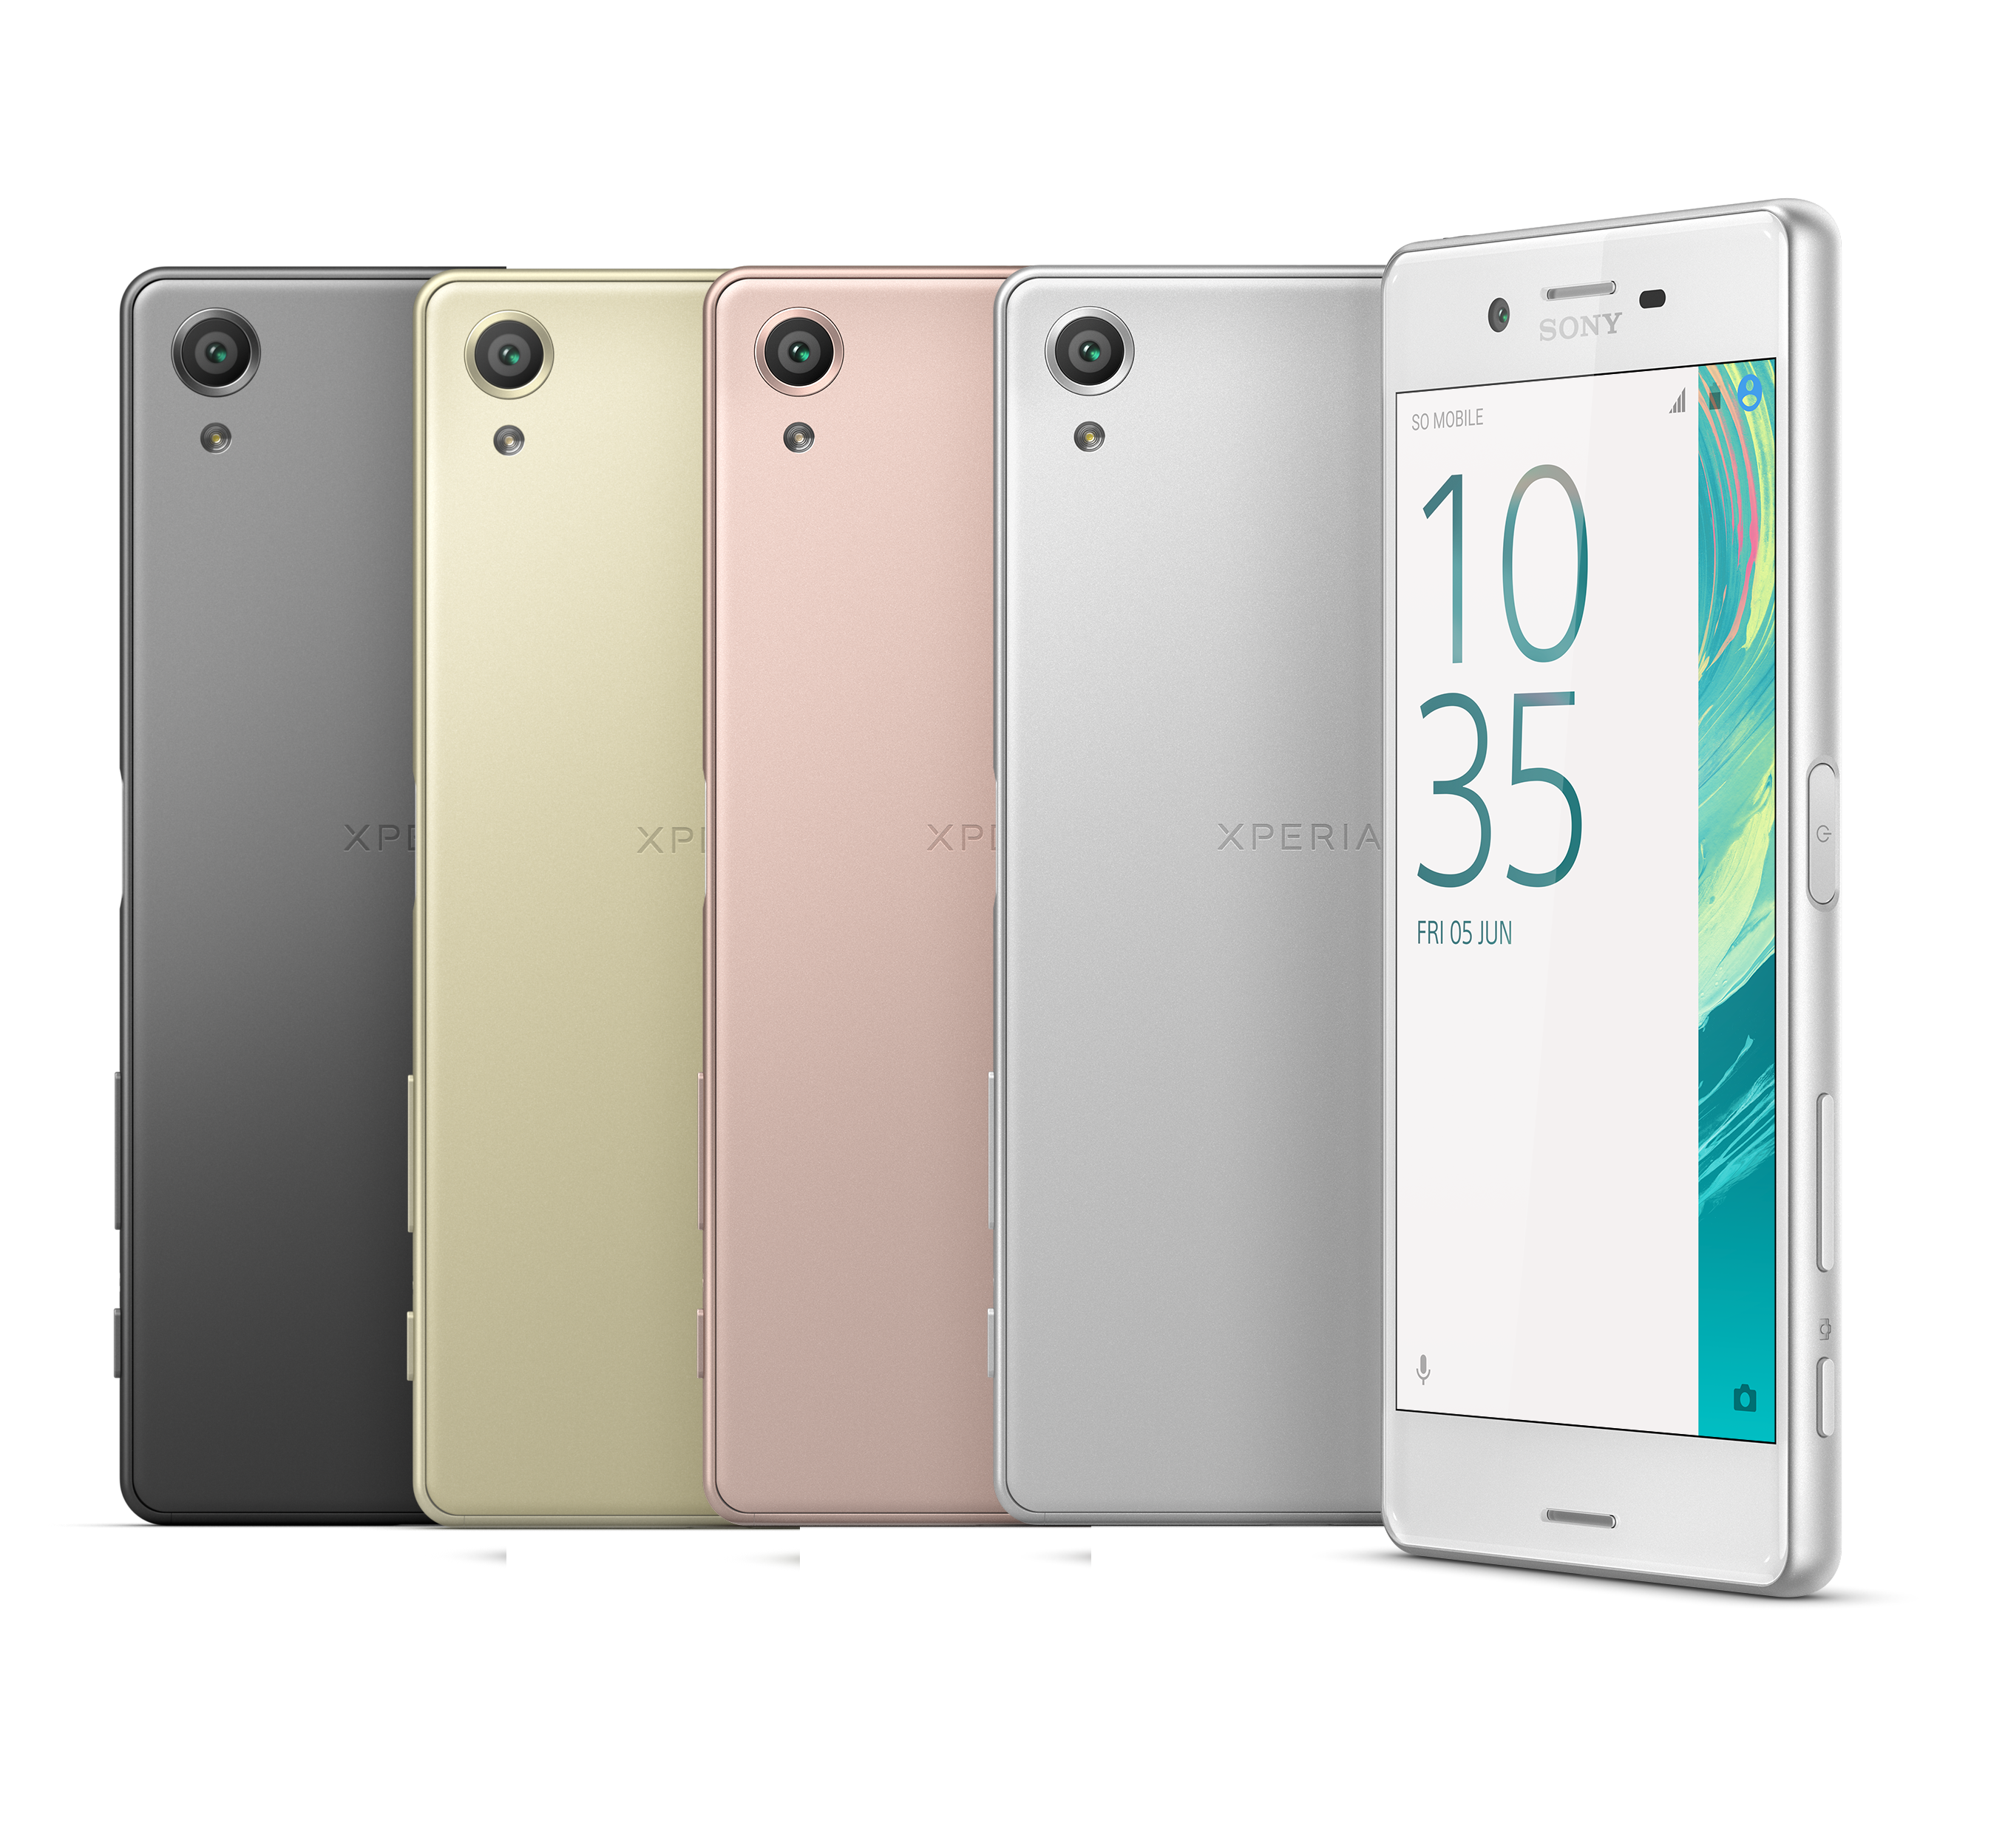 Sony Xperia X now available for pre-order